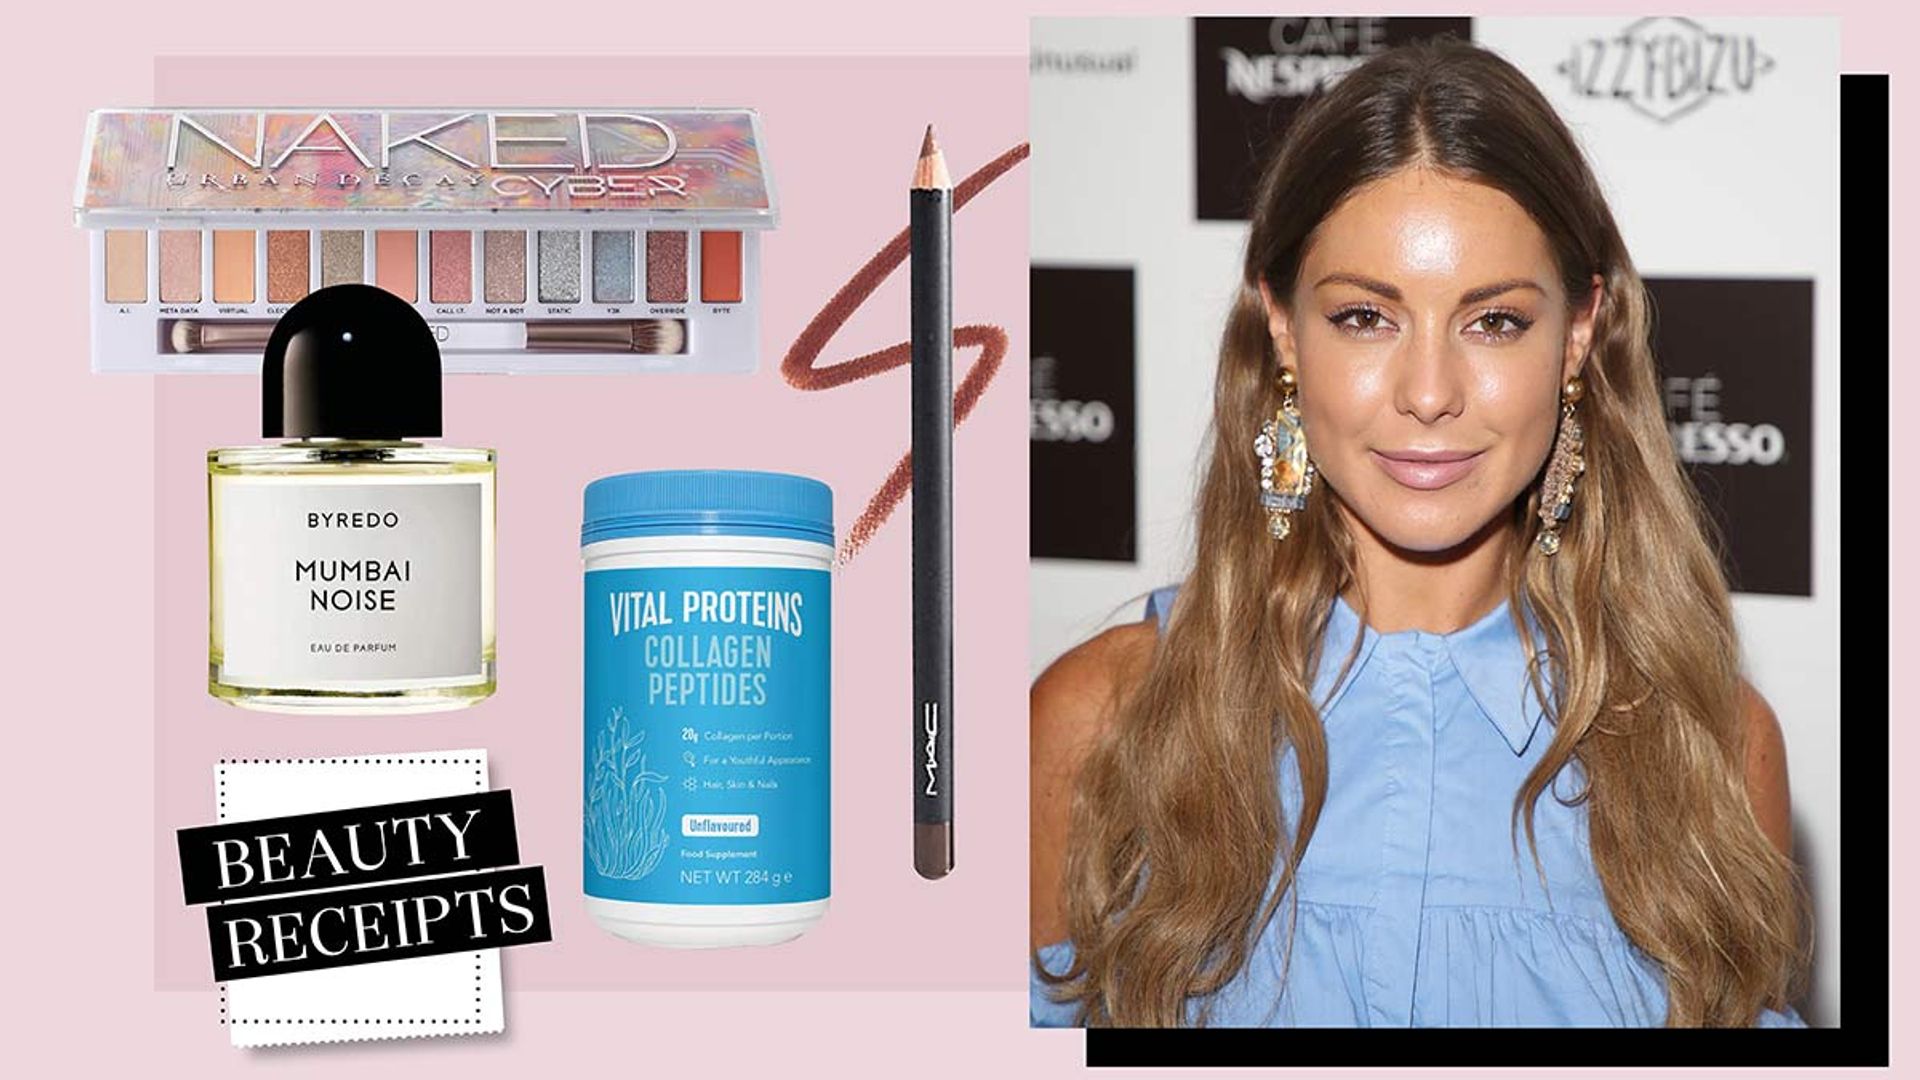 Beauty Receipts: What Louise Thompson's monthly beauty routine looks like